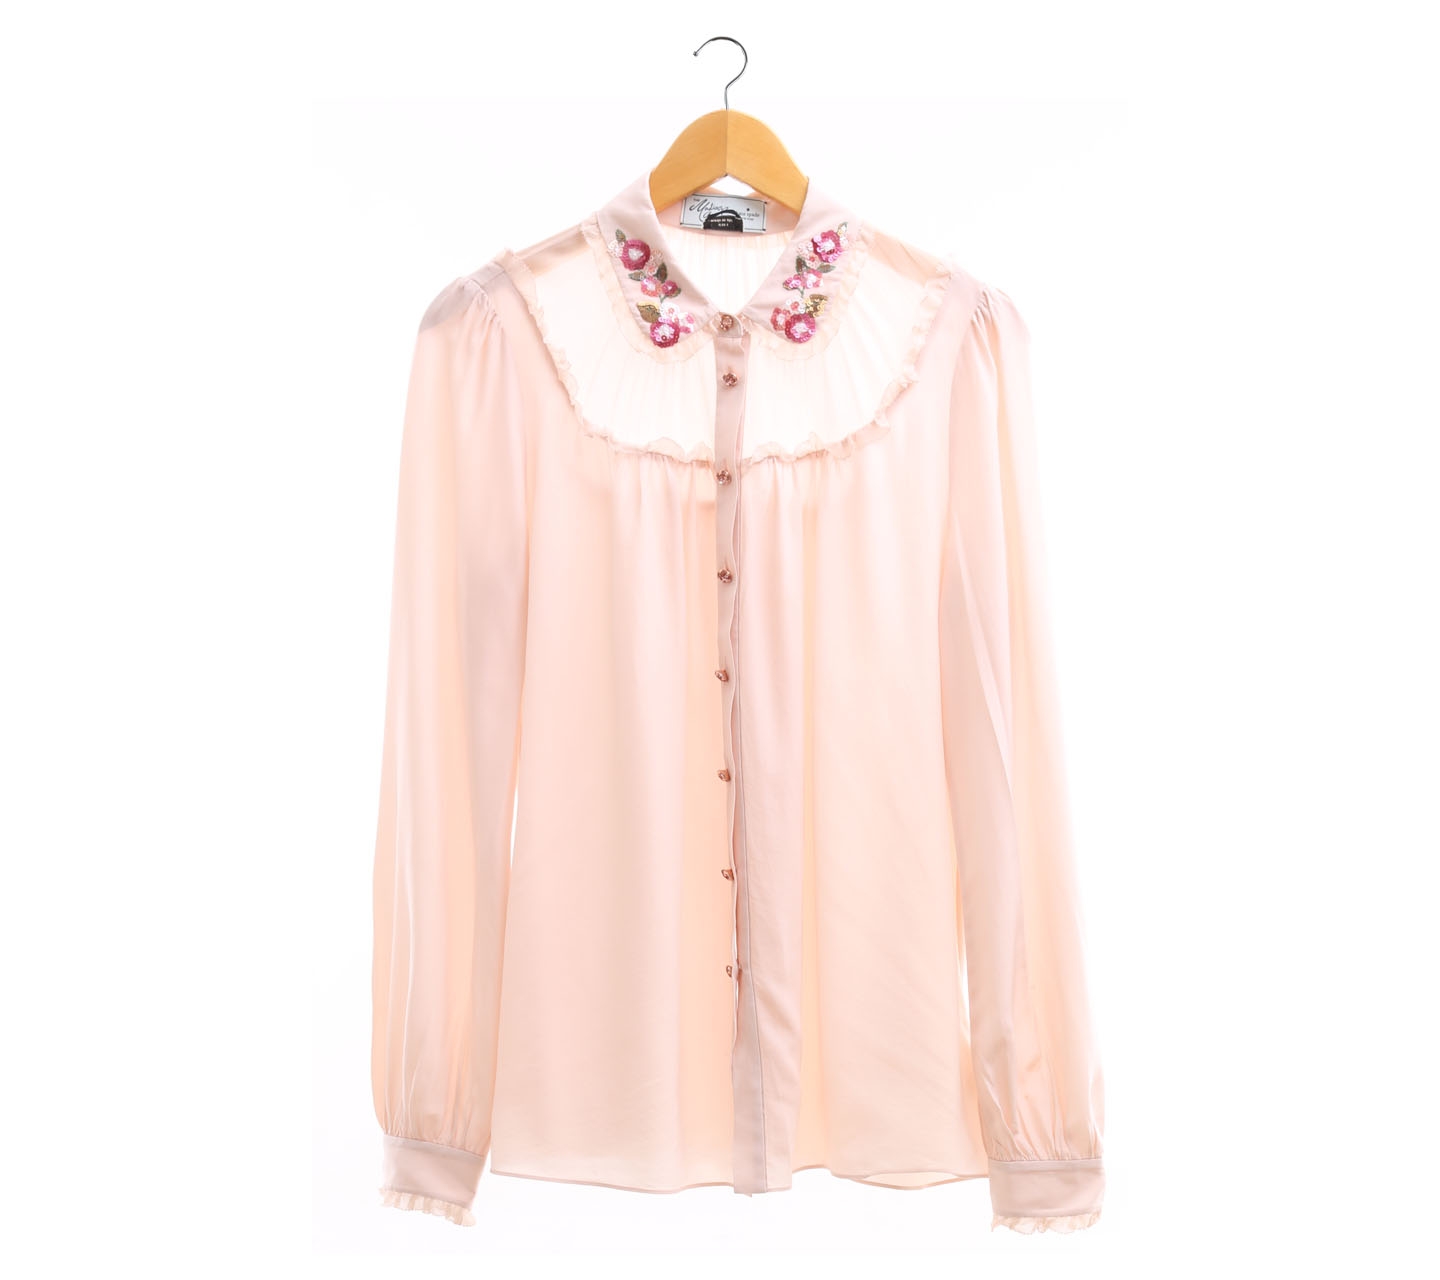 Kate Spade The Madison Ave Collection Peach Shirt